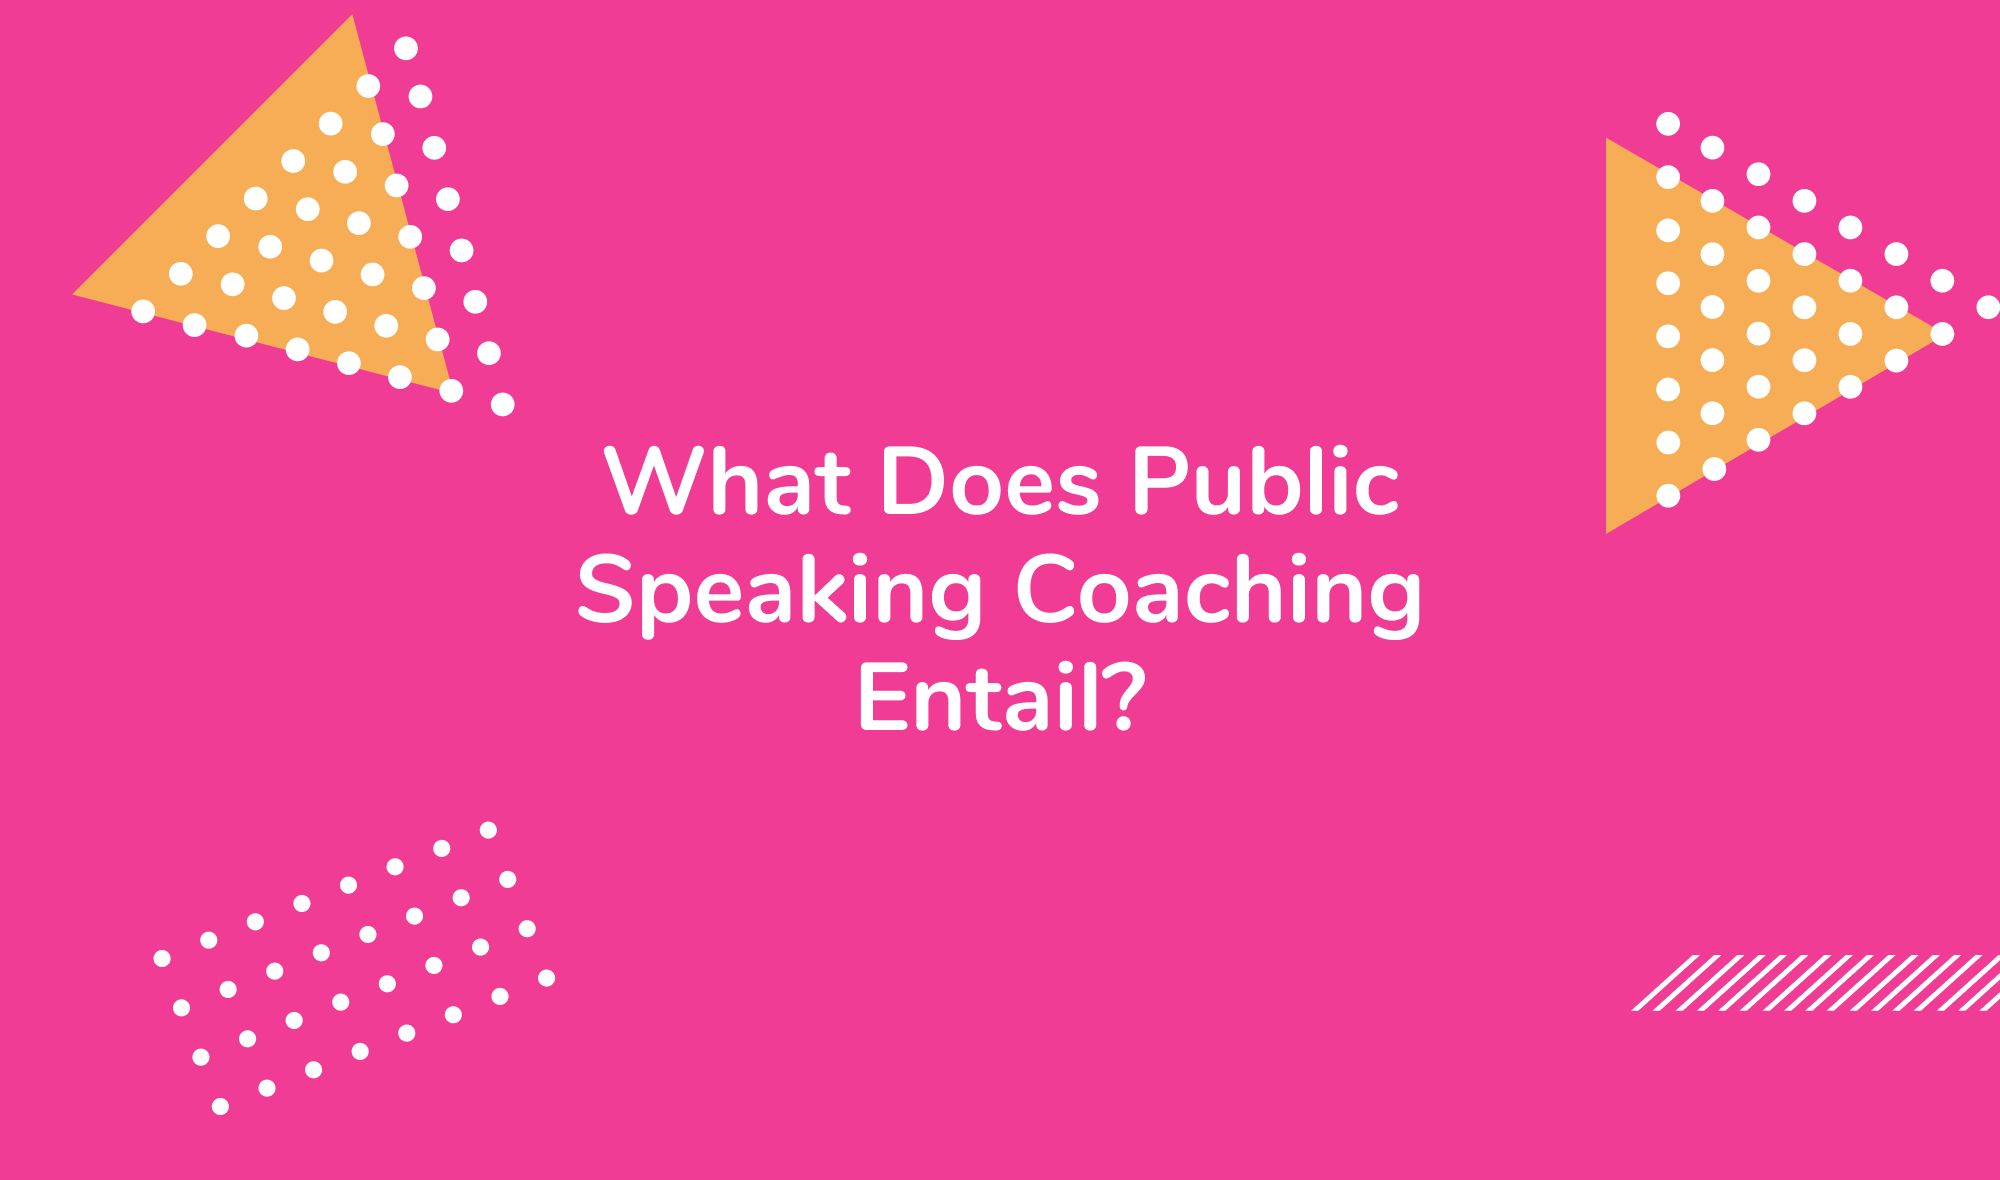 What Does Public Speaking Coaching Entail?